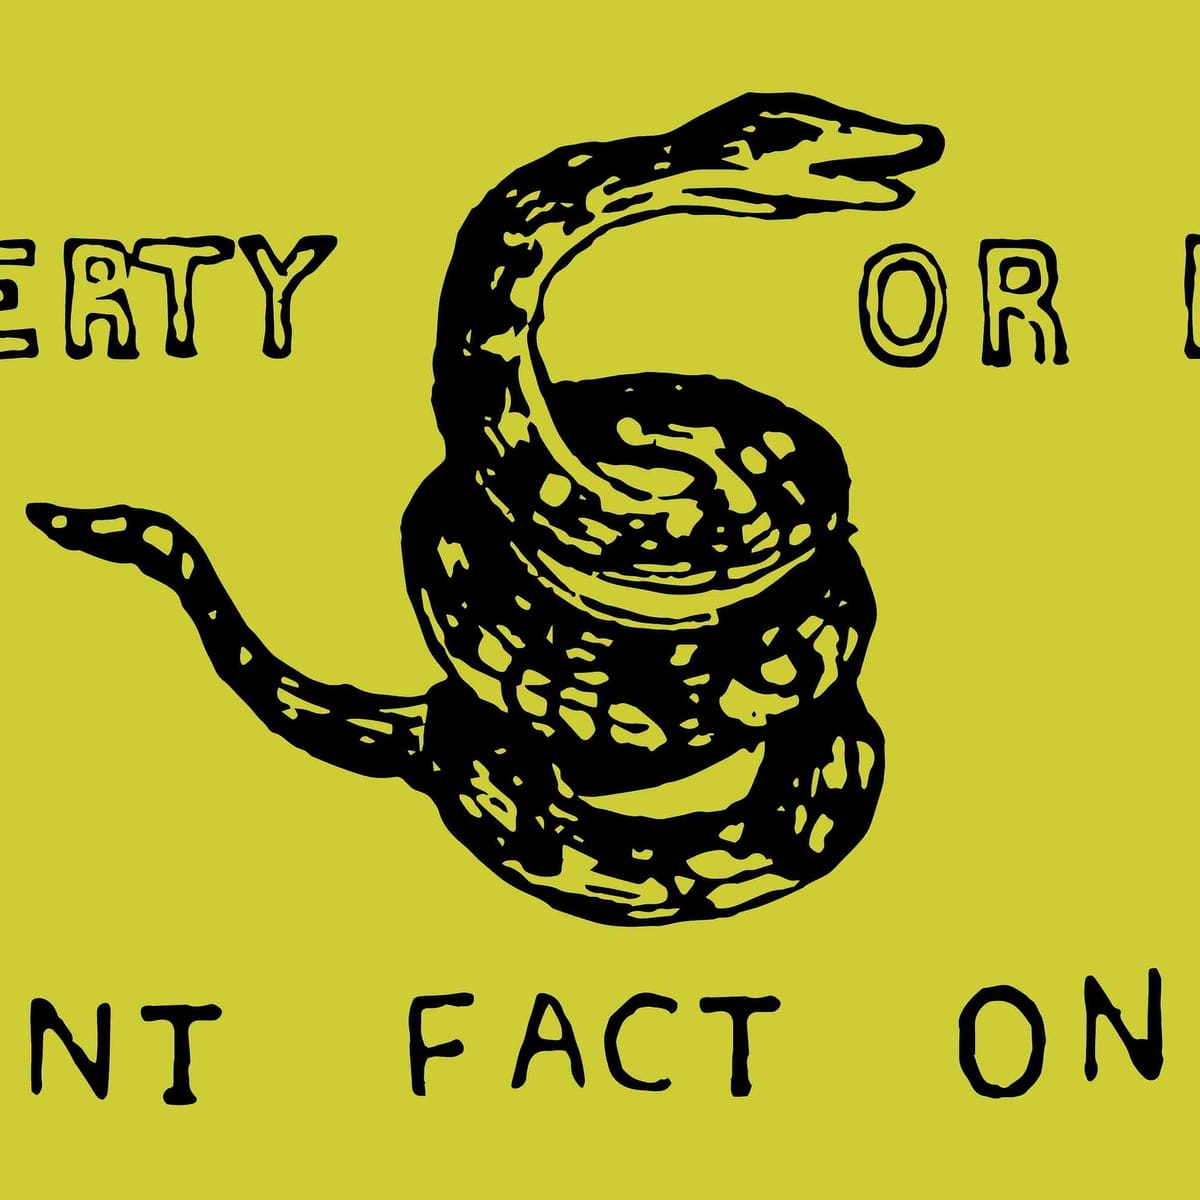 Jonathan Chait declares independence from facts: INDIGNITY VOL. 3, NO. 114